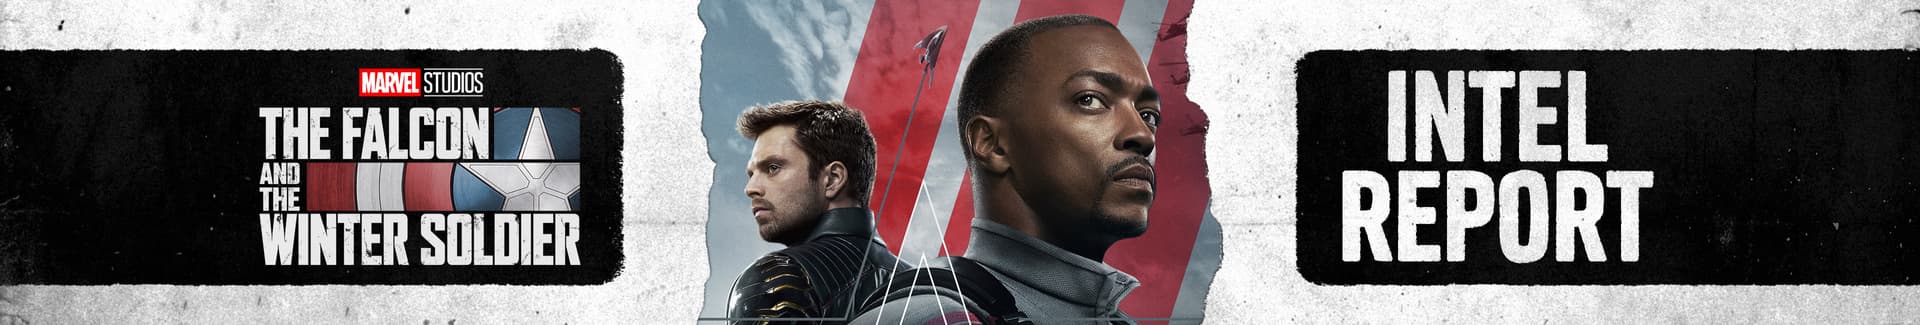 The Falcon and The Winter Soldier: Episode 5 Intel Report 